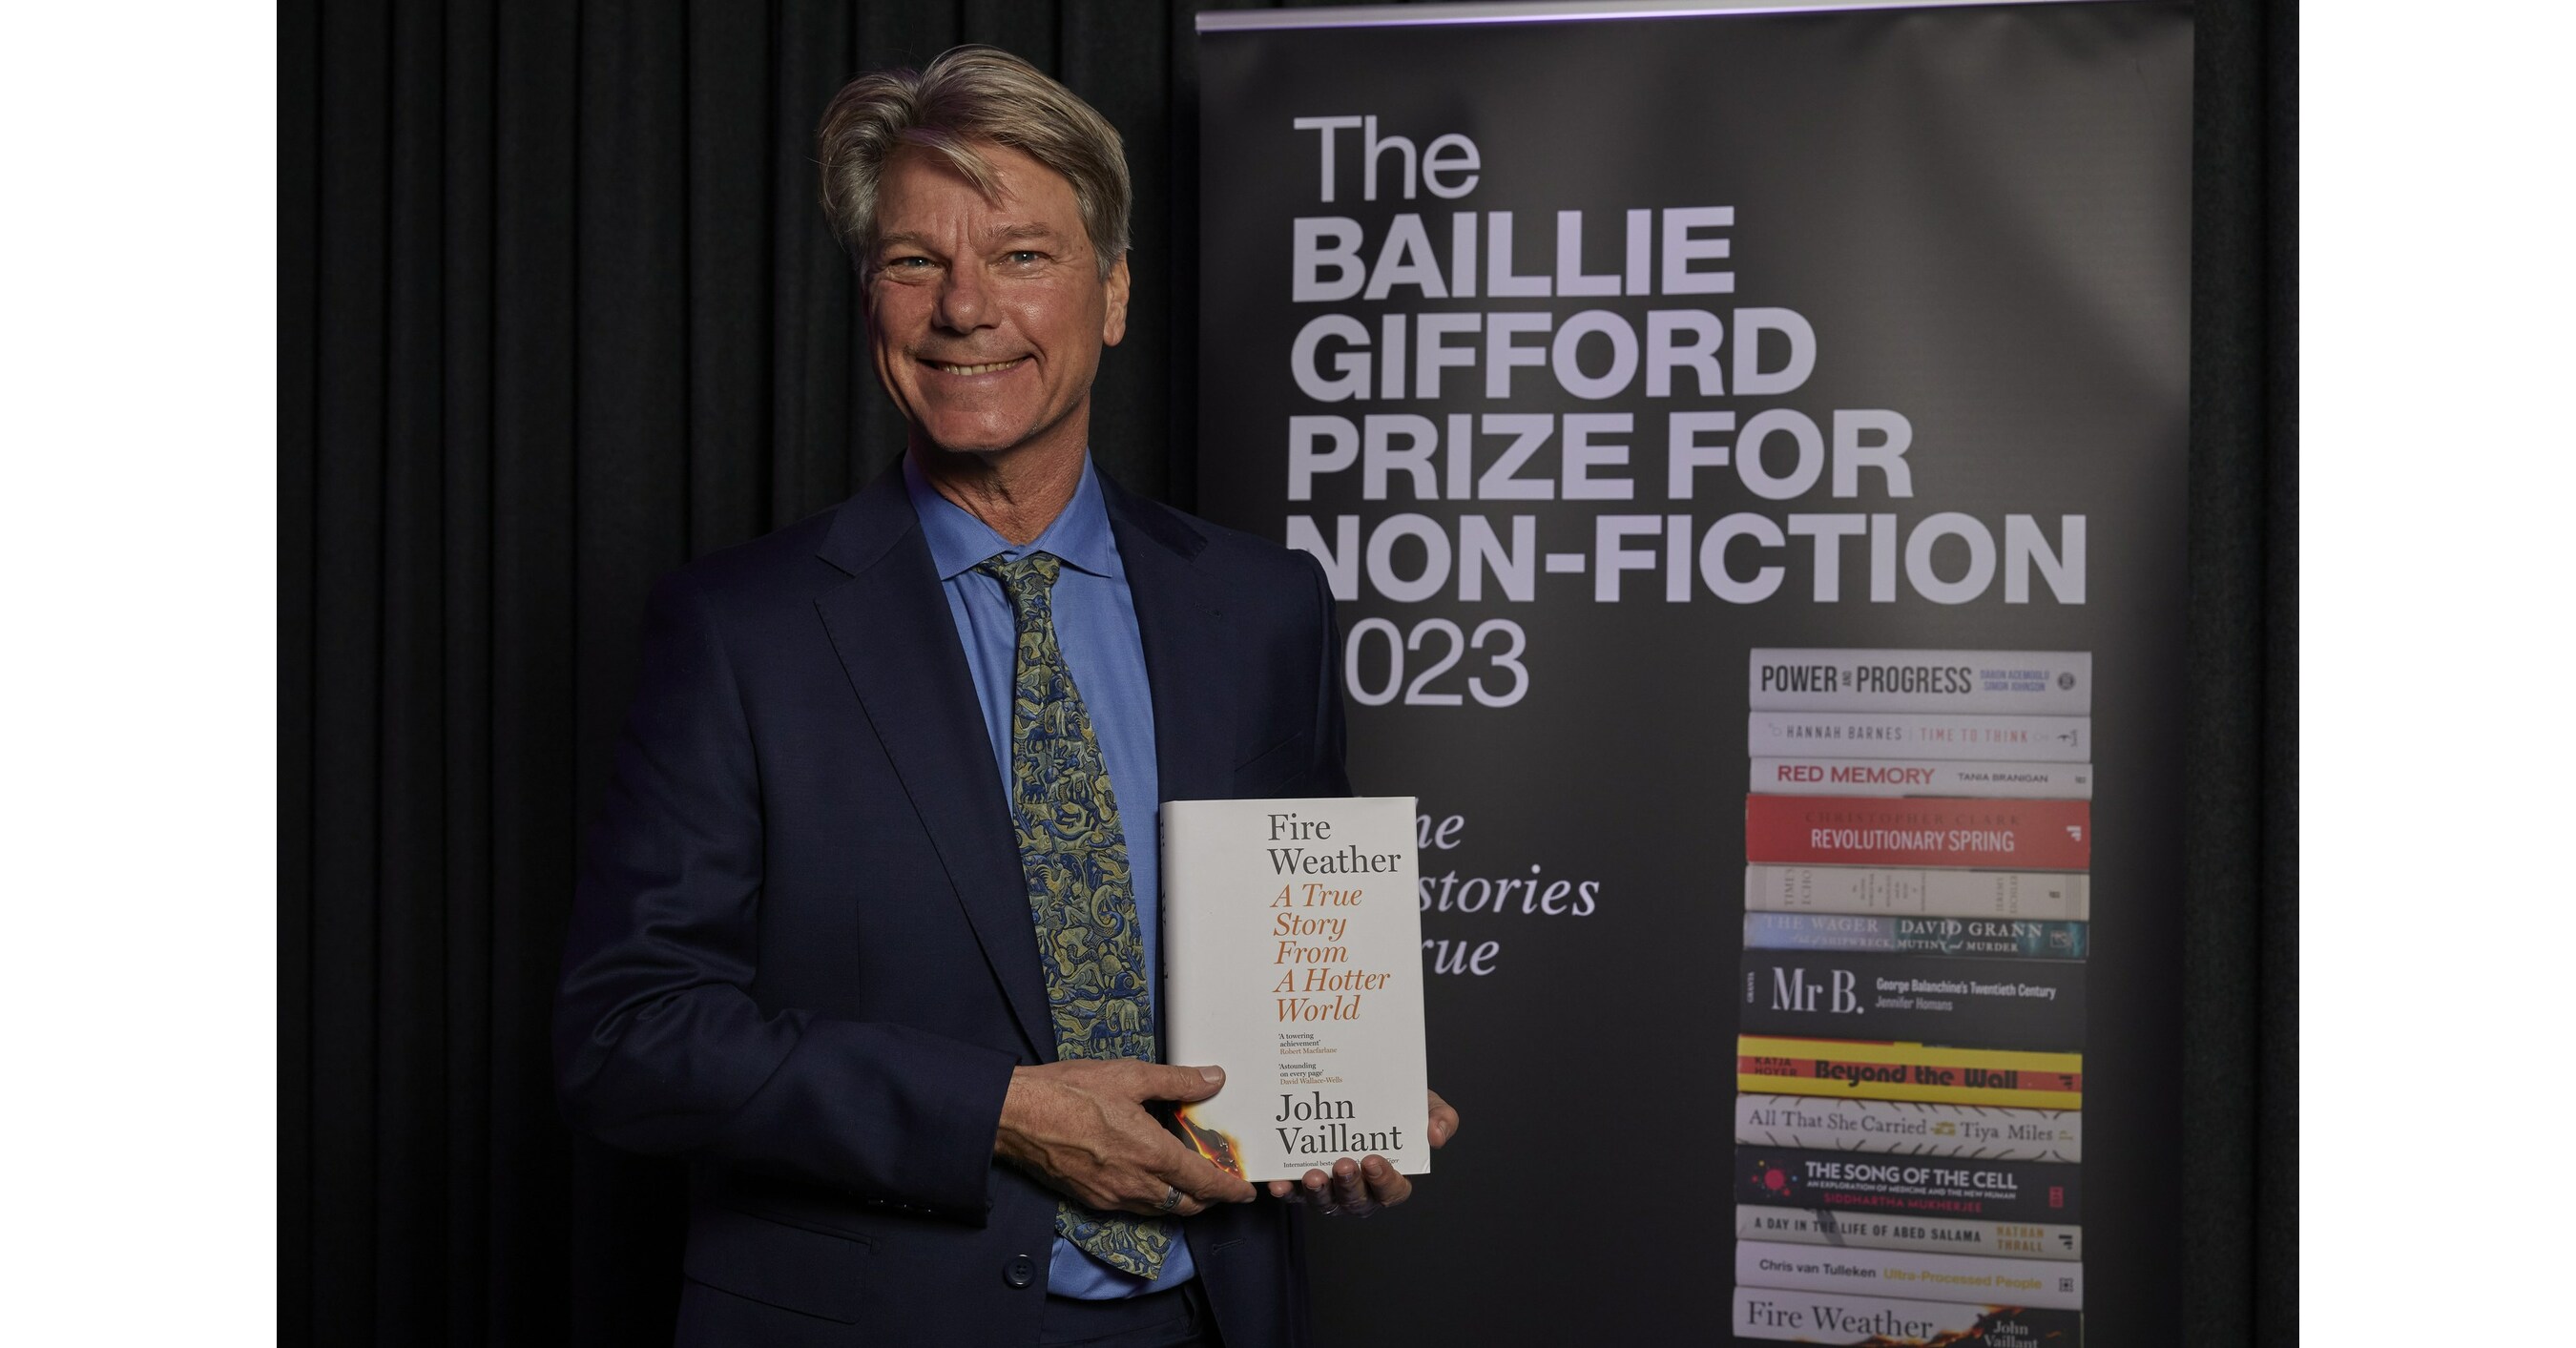 A true story from a hotter world wins £50,000 Baillie Gifford Non-Fiction Prize 2023